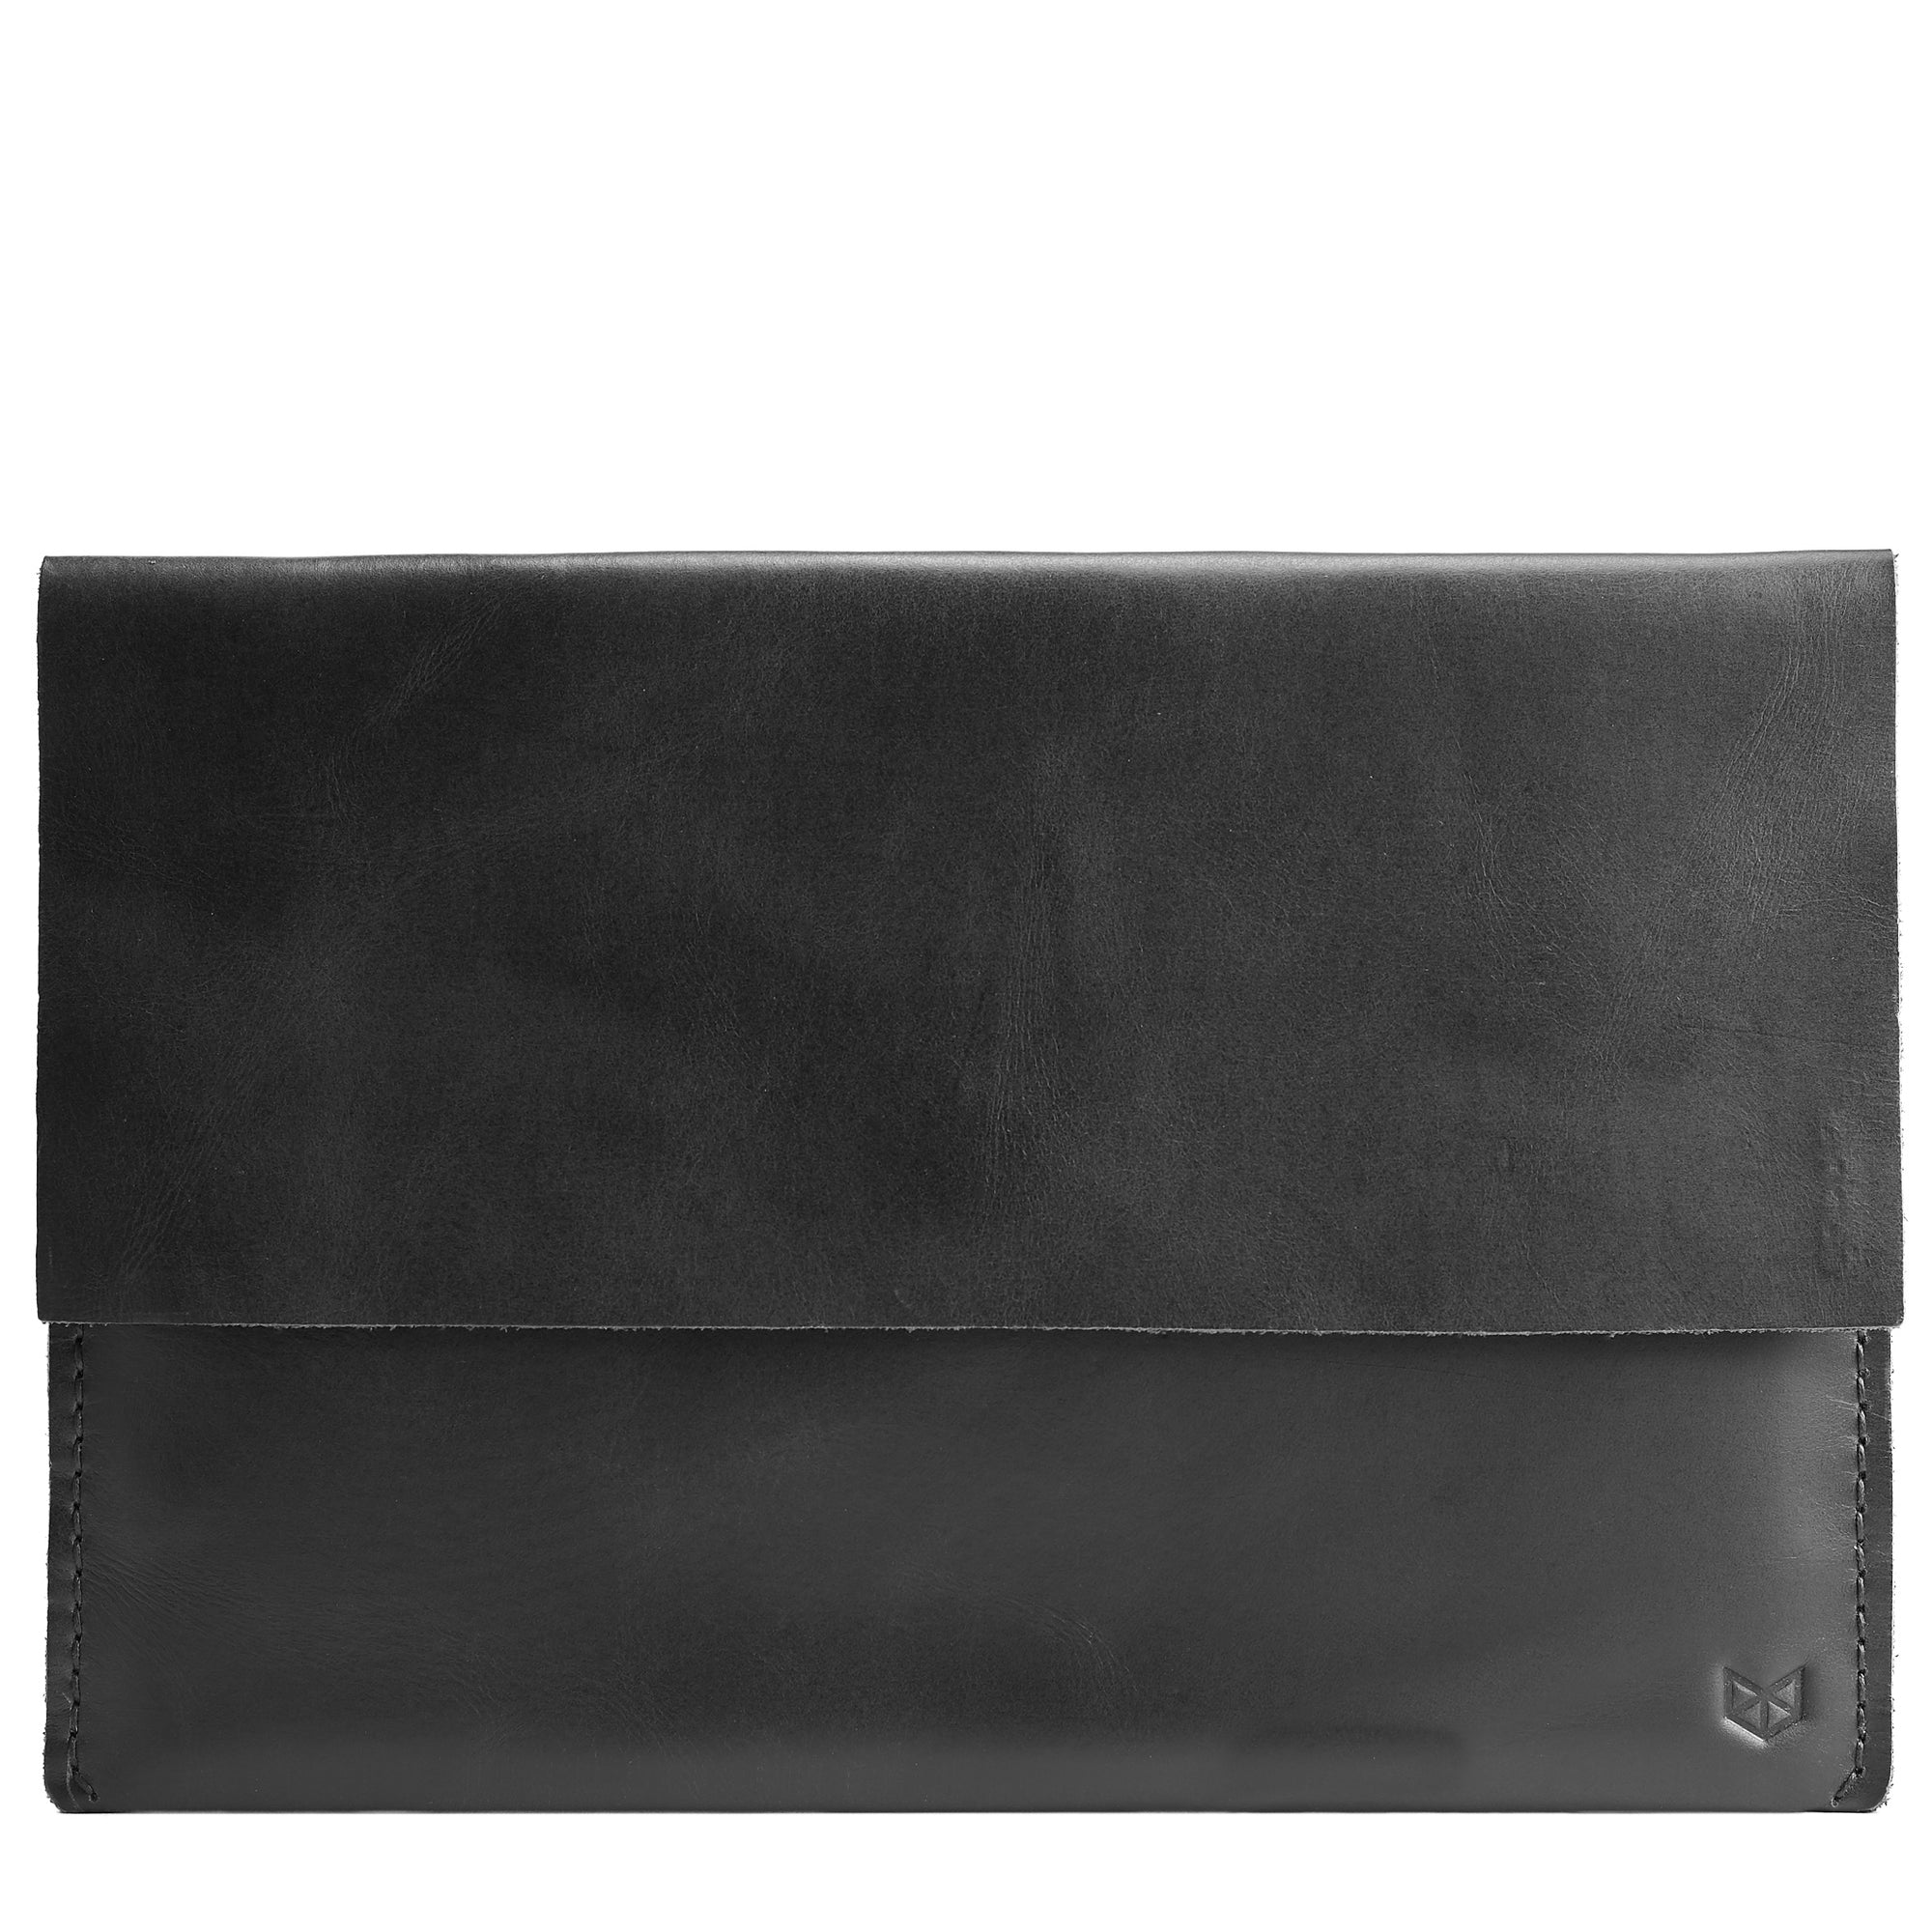 Cover. Black Leather MacBook Case. MacBook Sleeve by Capra Leather